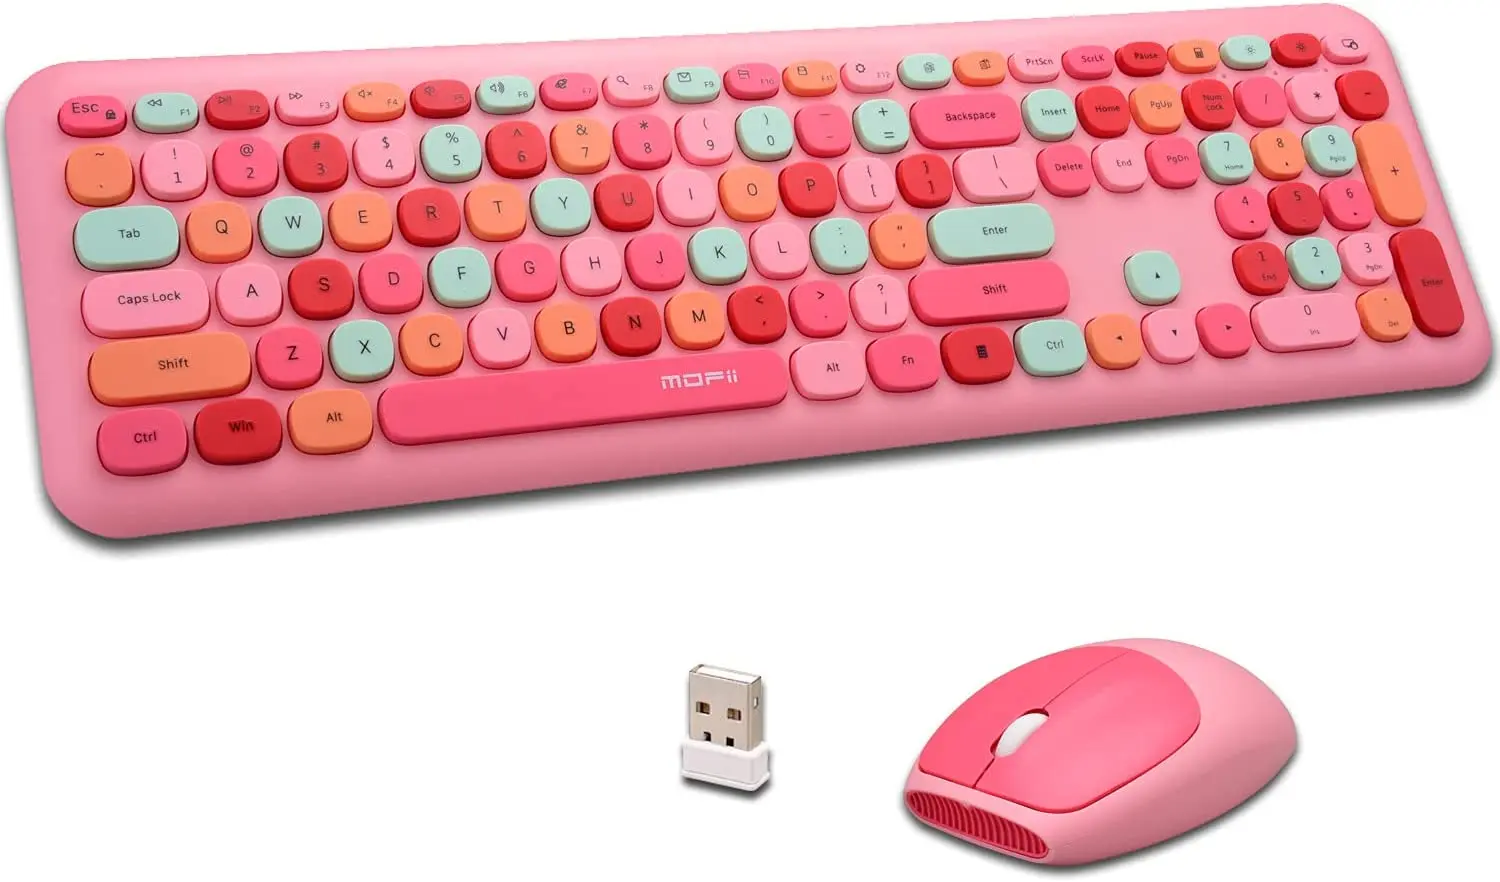 

MOFii Wireless Keyboard and Mouse Combo,2.4G Slim Full-Sized Colorful Keyboard Mouse for PC Desktop Laptops Windows(Pink